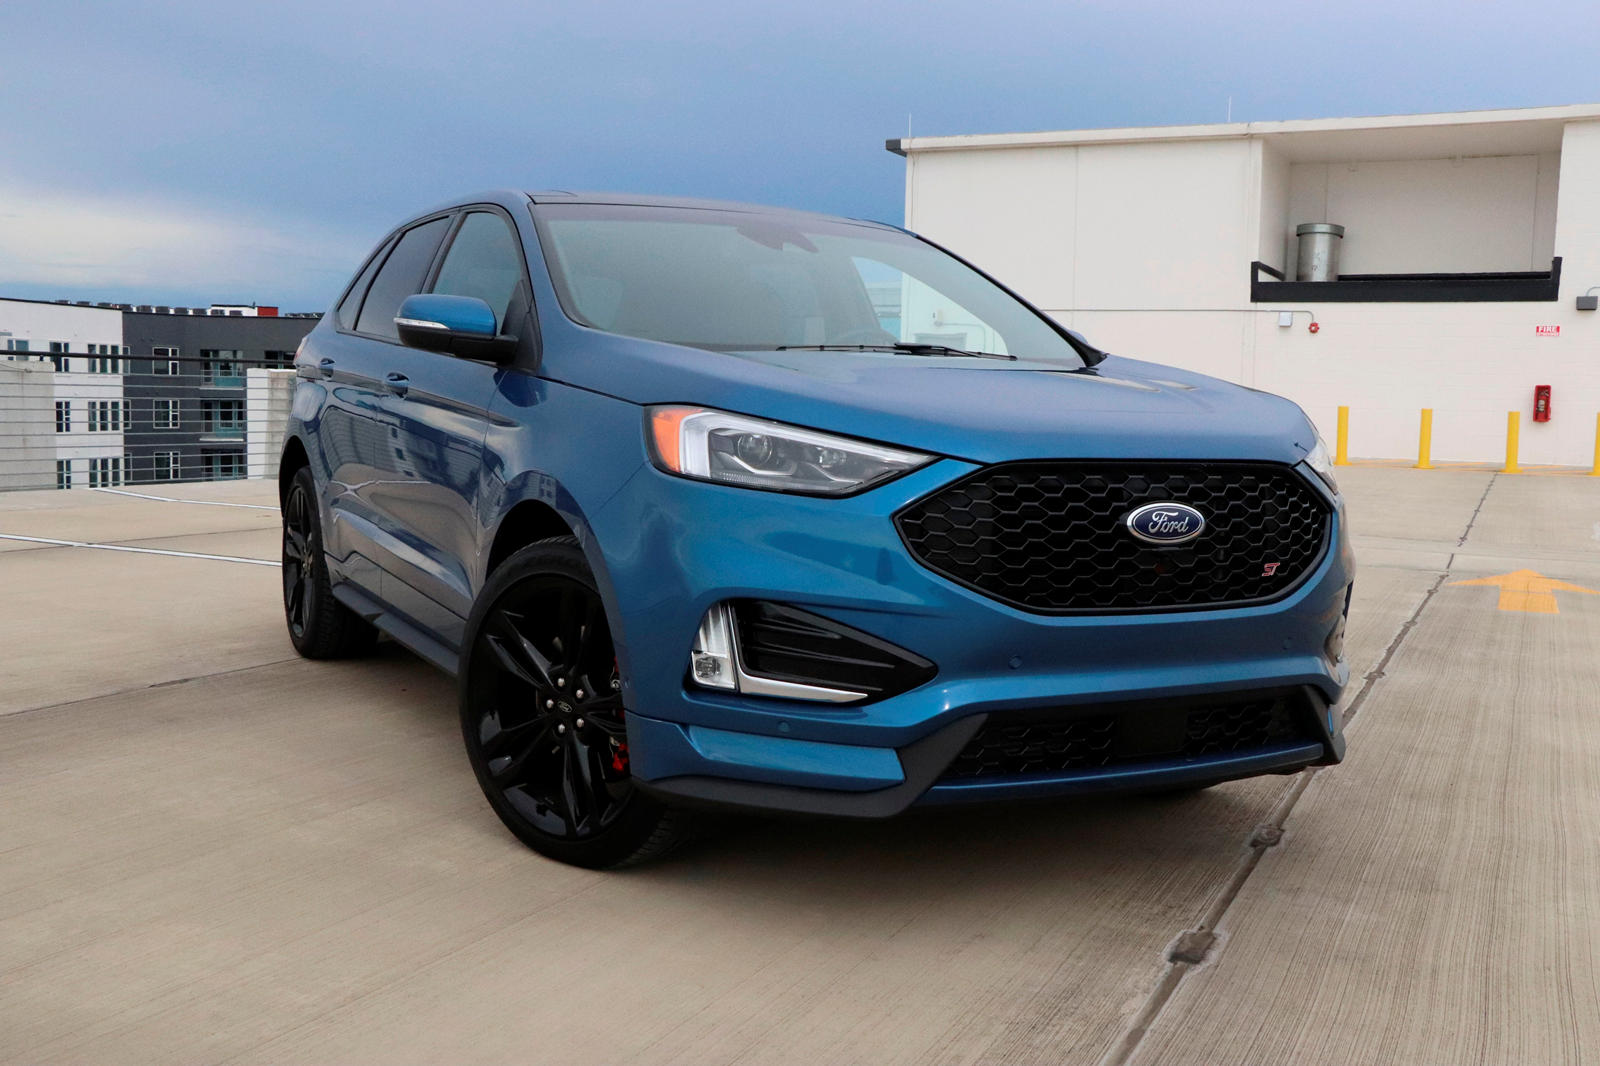 2024 Ford Edge® SUV, Pricing, Photos, Specs & More